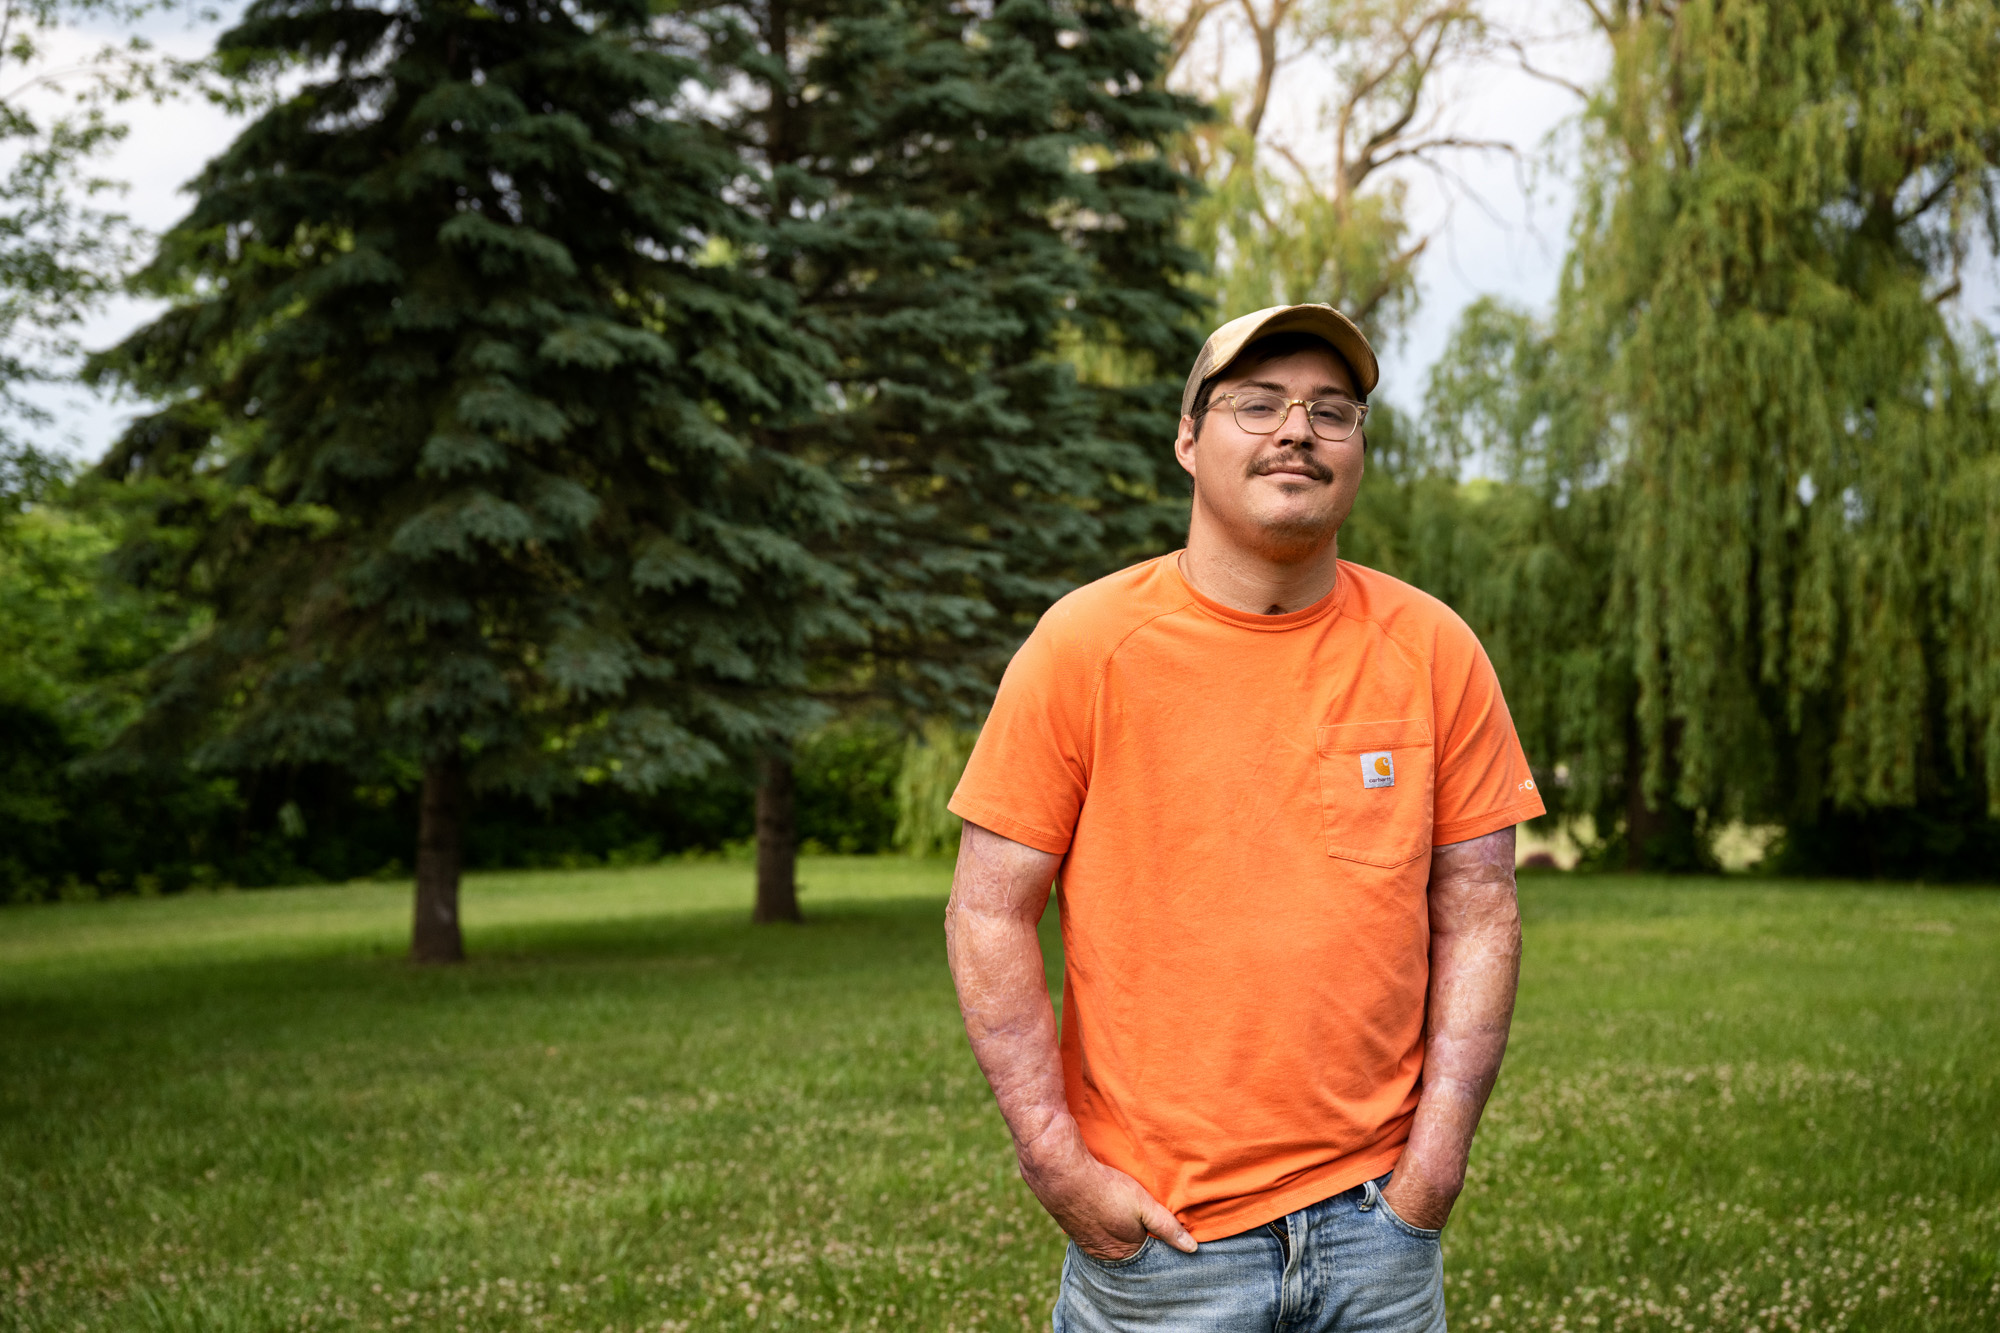 James Rogers, a former patient at the University of Iowa Burn Treatment Center, standing outdoors